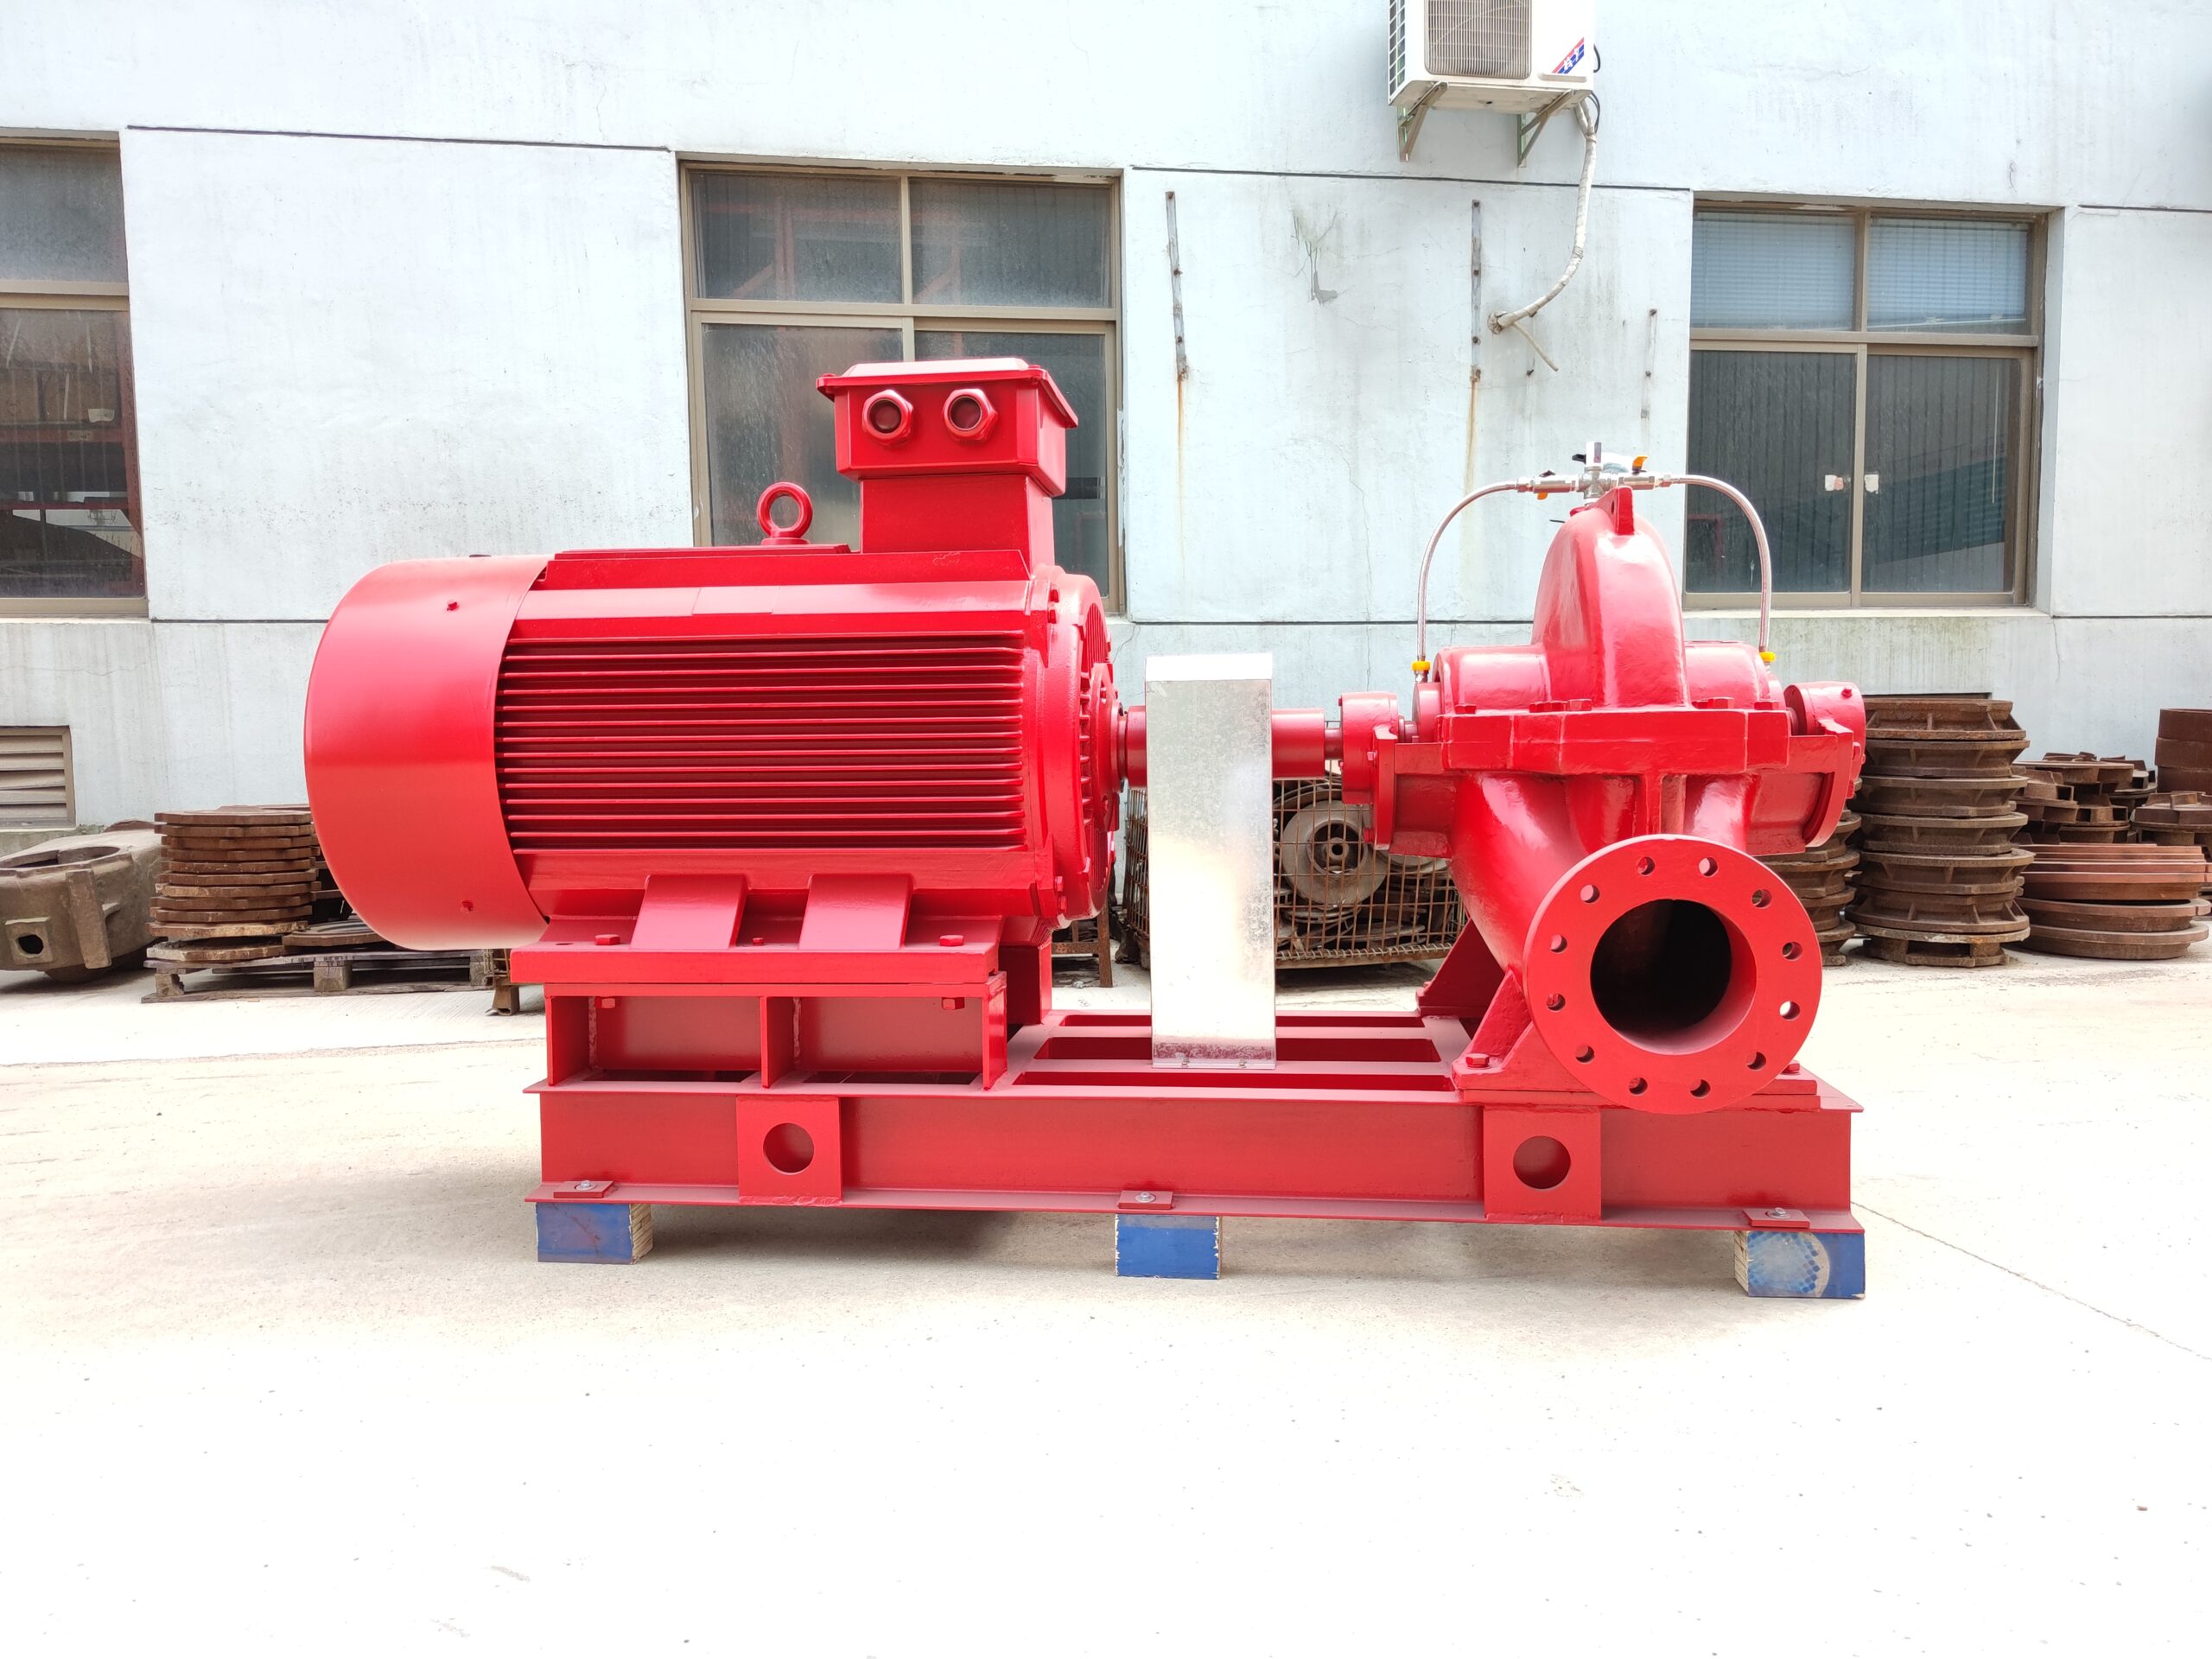 How do you size a fire pump for a specific building or facility?